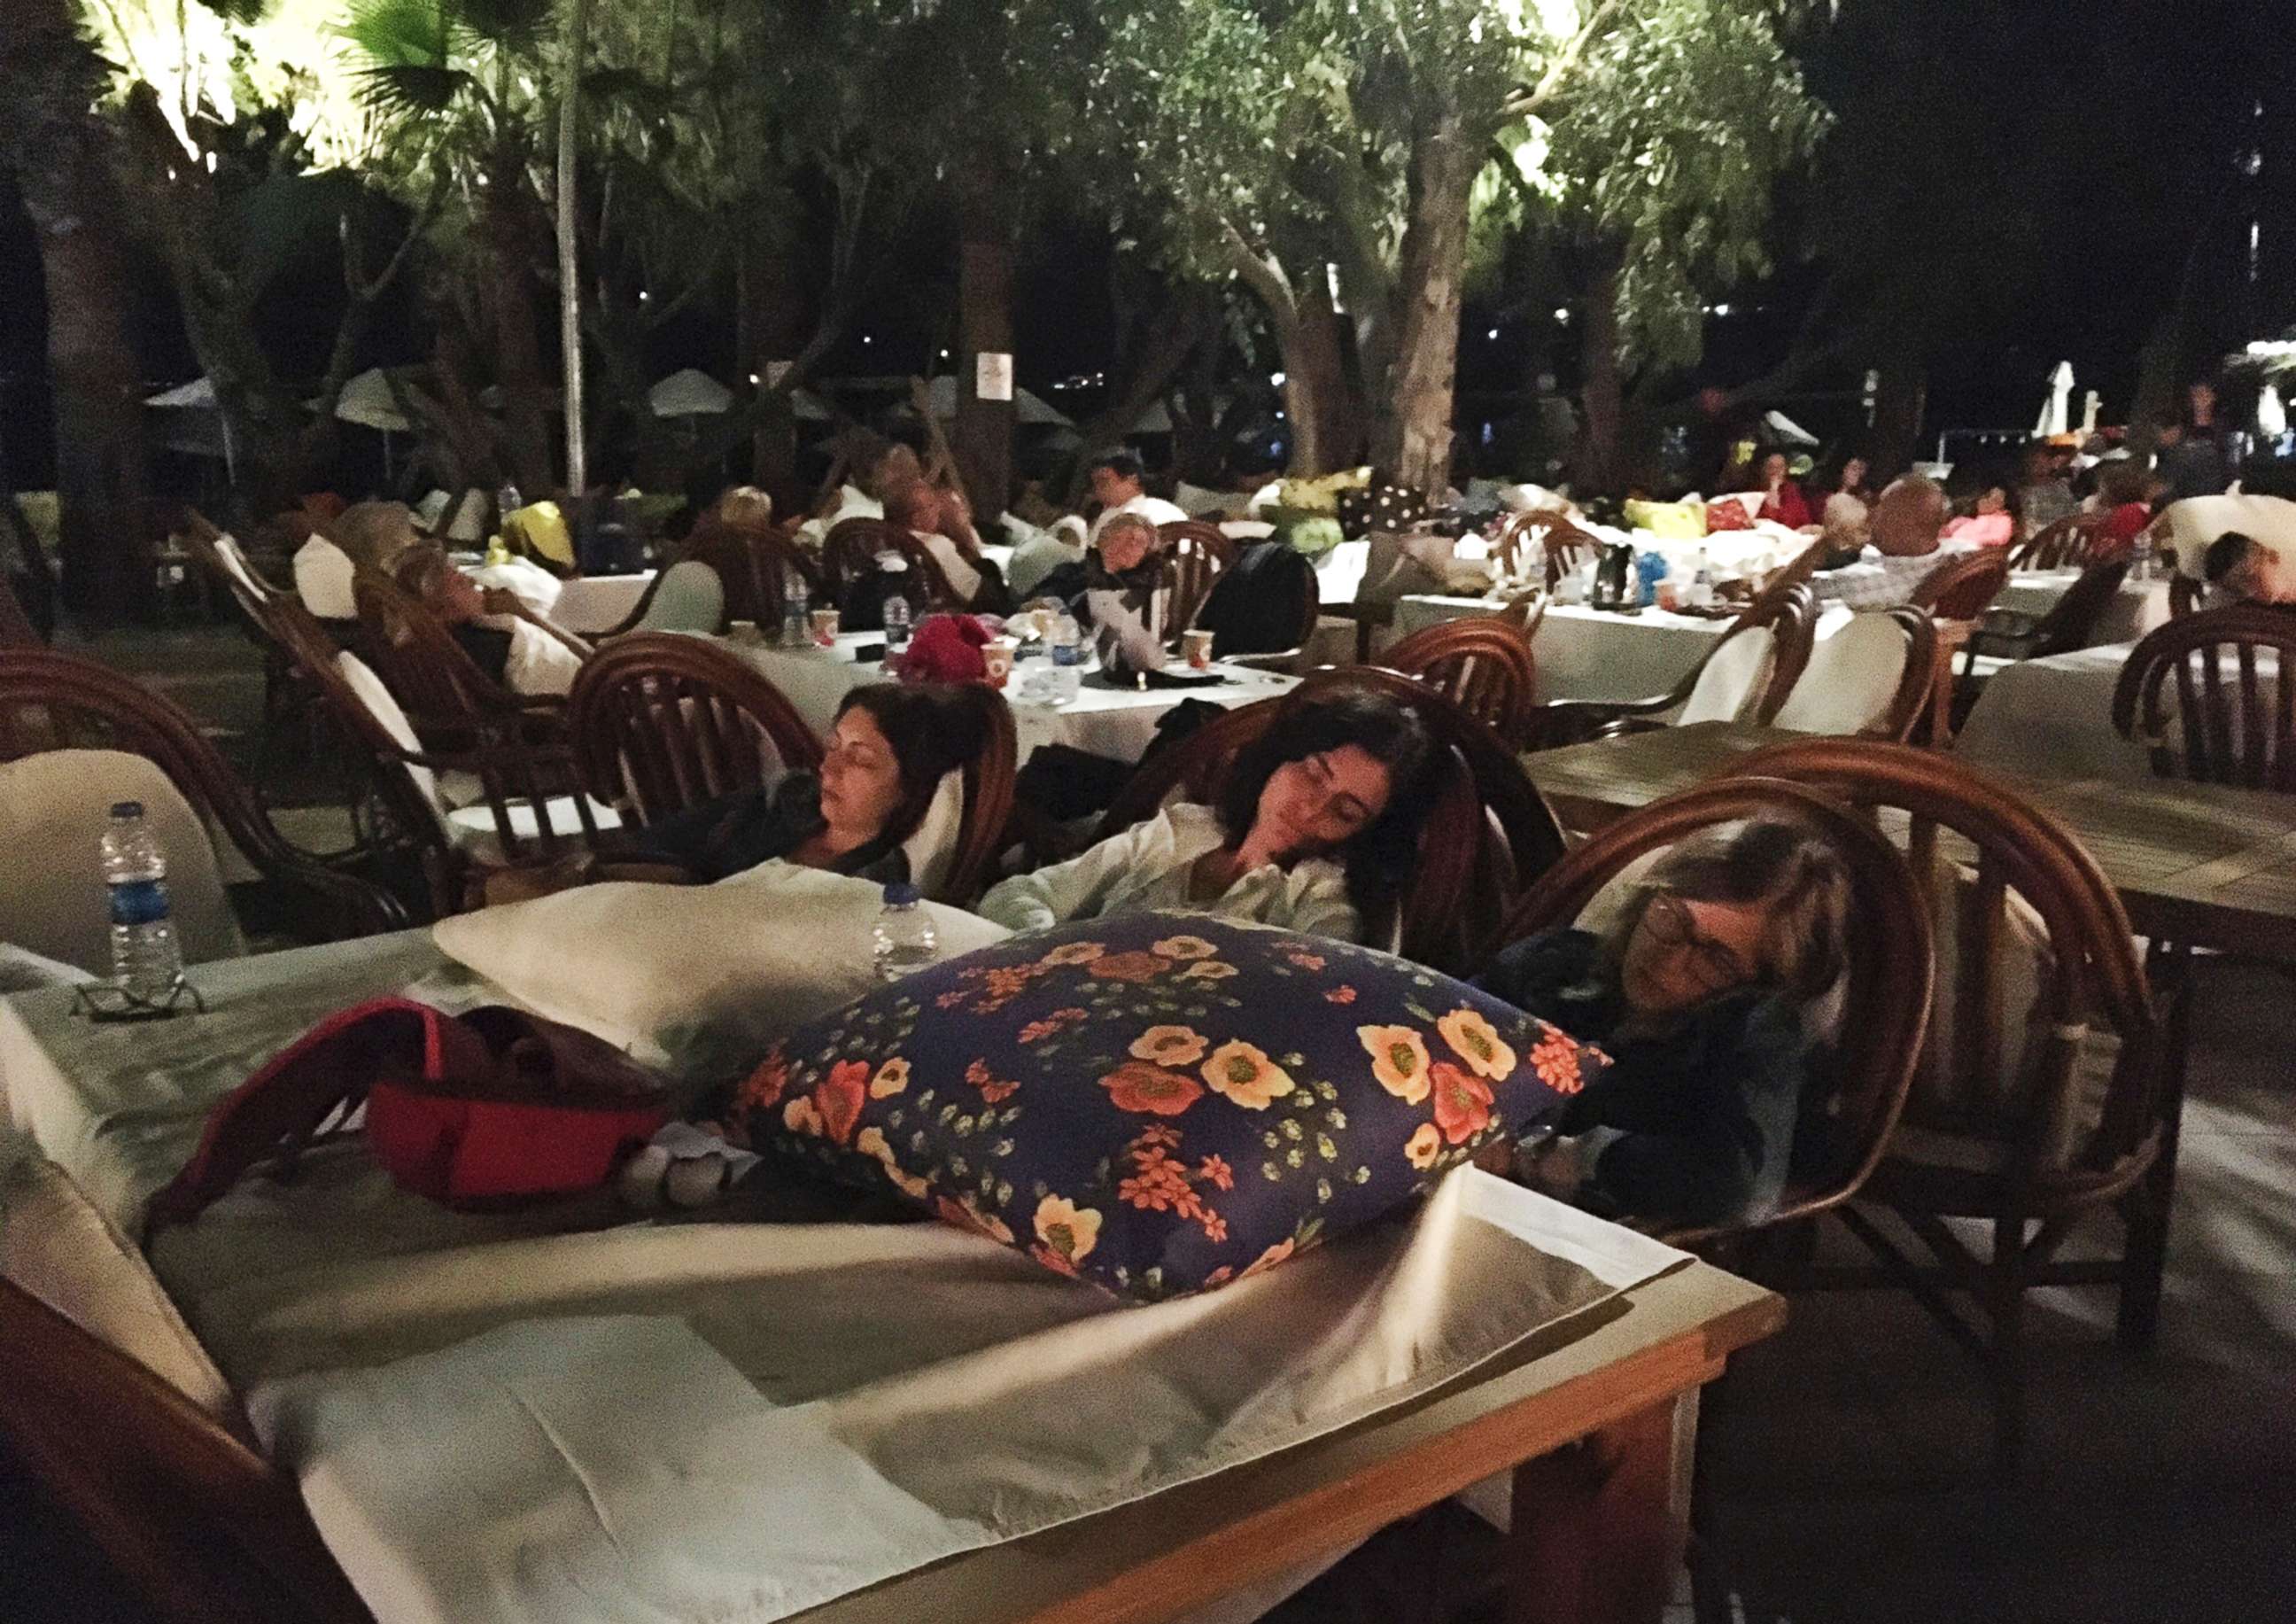 PHOTO: Hotel guests sleep outdoors after abandoning their rooms following an earthquake in Bitez, a resort town about 4 miles west of Bodrum, Turkey, early Friday, July 21, 2017.